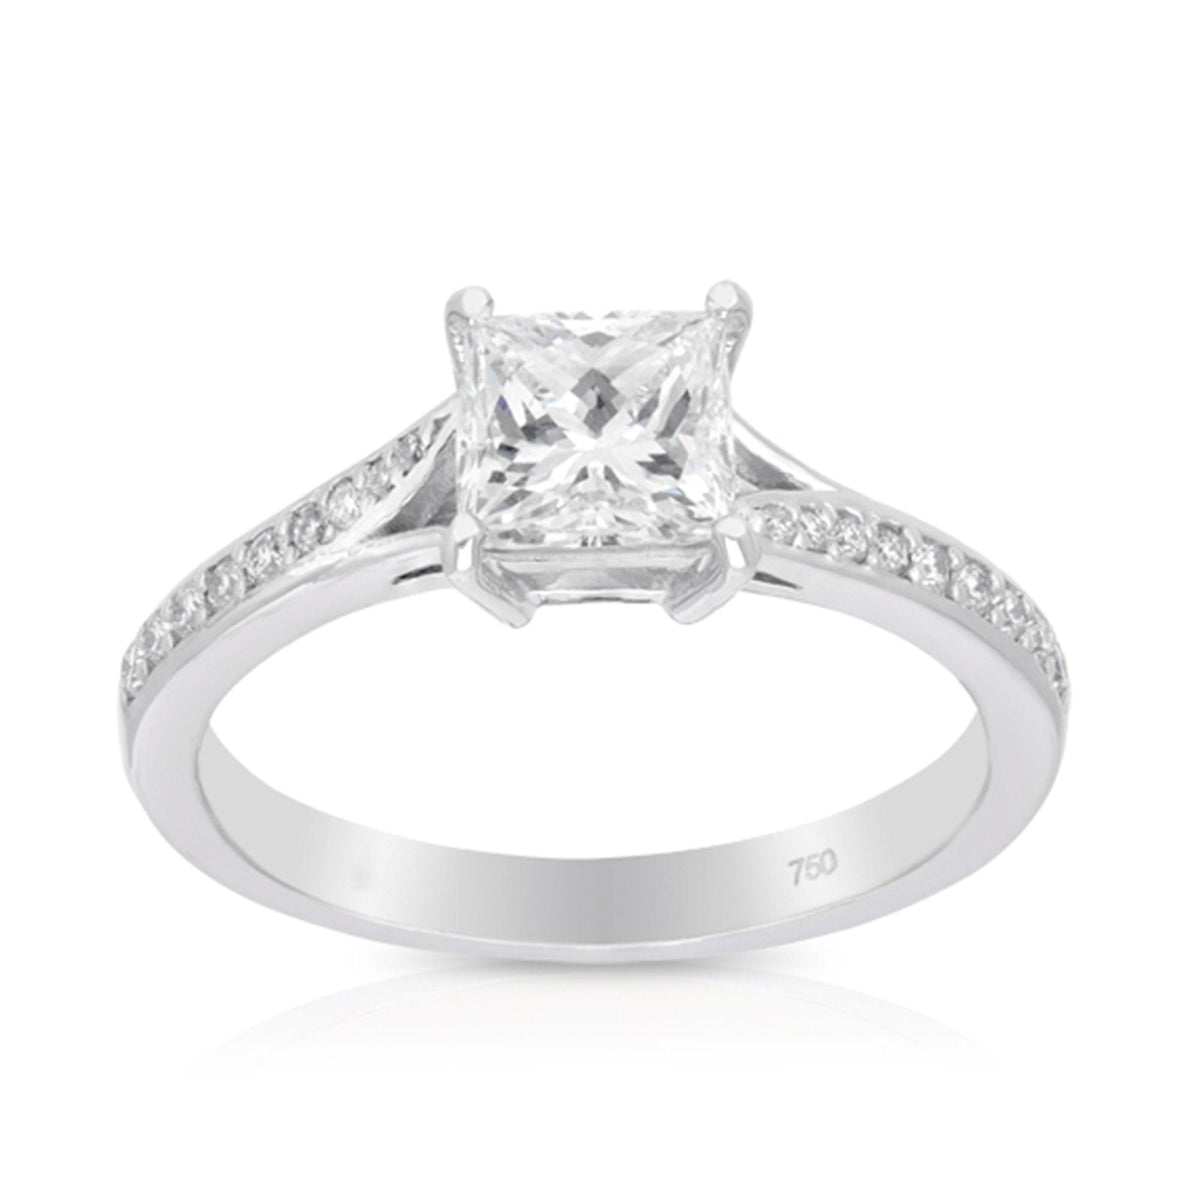 Diamond Solitaire Princess Cut Pavé Band Engagement Ring in 18ct White Gold Ring TDW 1.19ct - Wallace Bishop